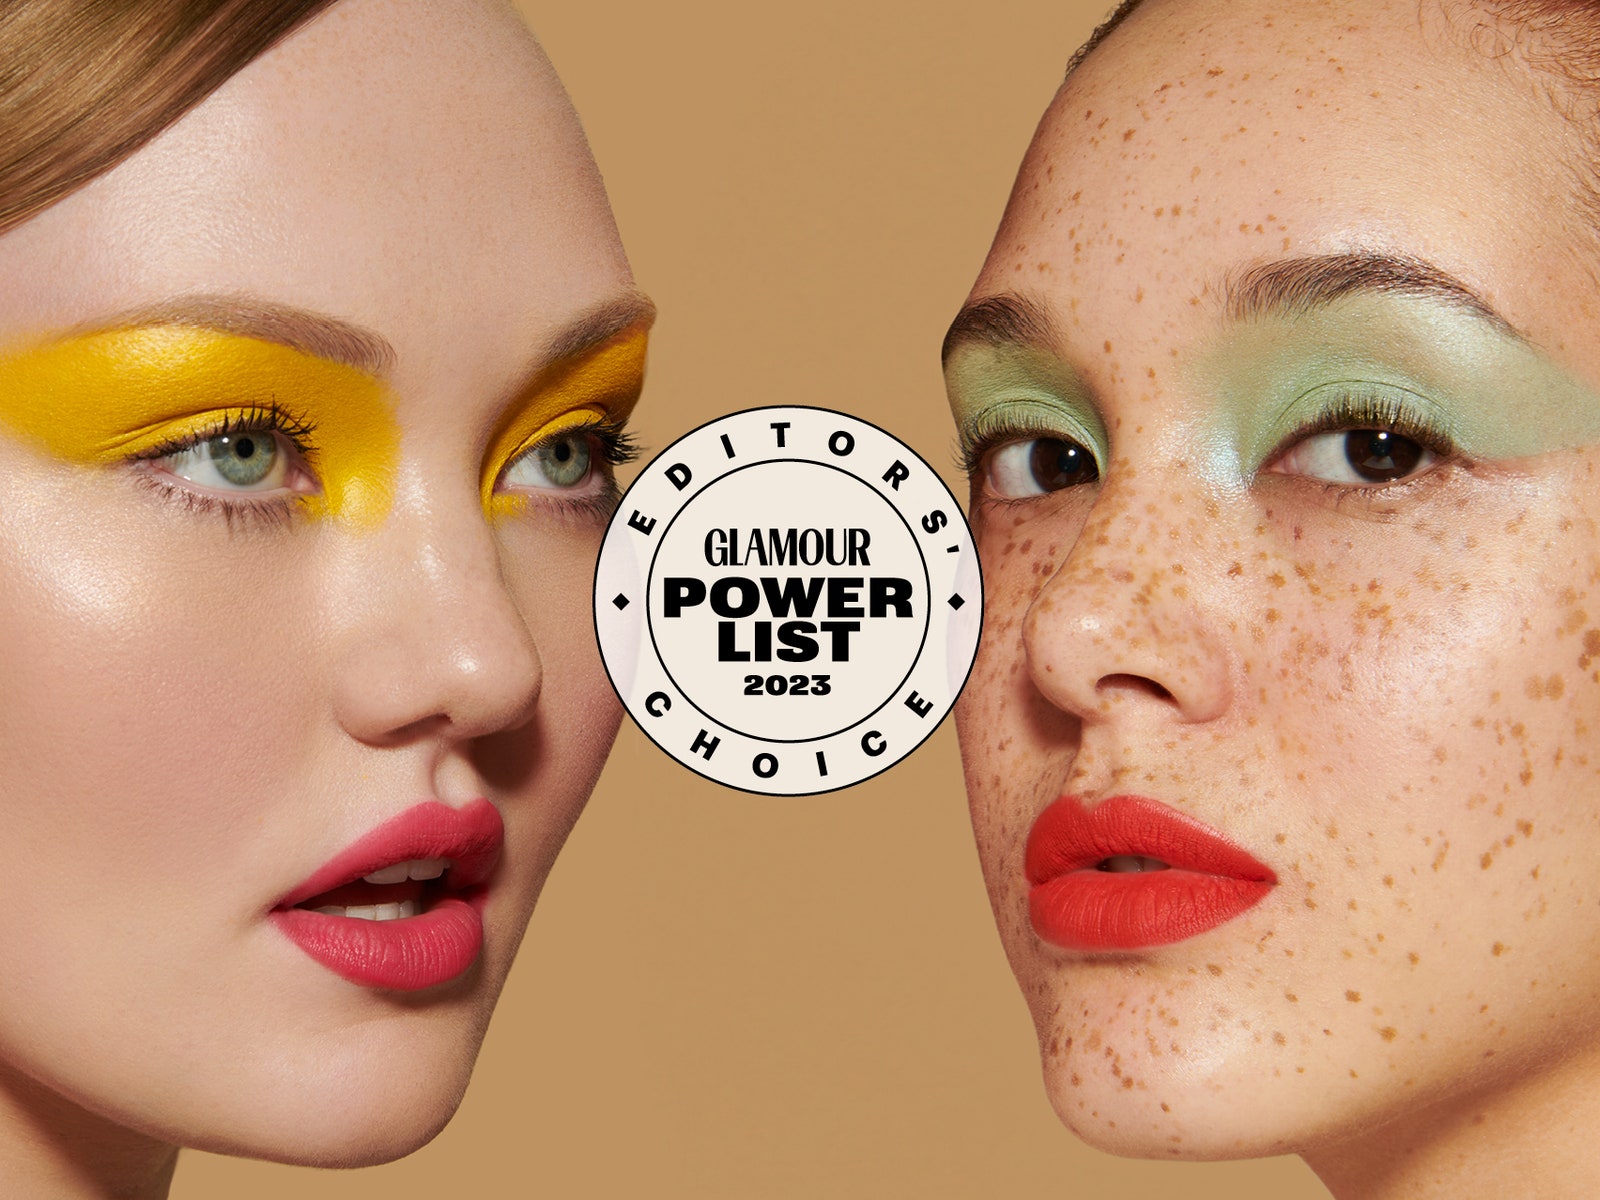 6 Editors' Choice winners that were standouts in the GLAMOUR Beauty Power List Awards 2023